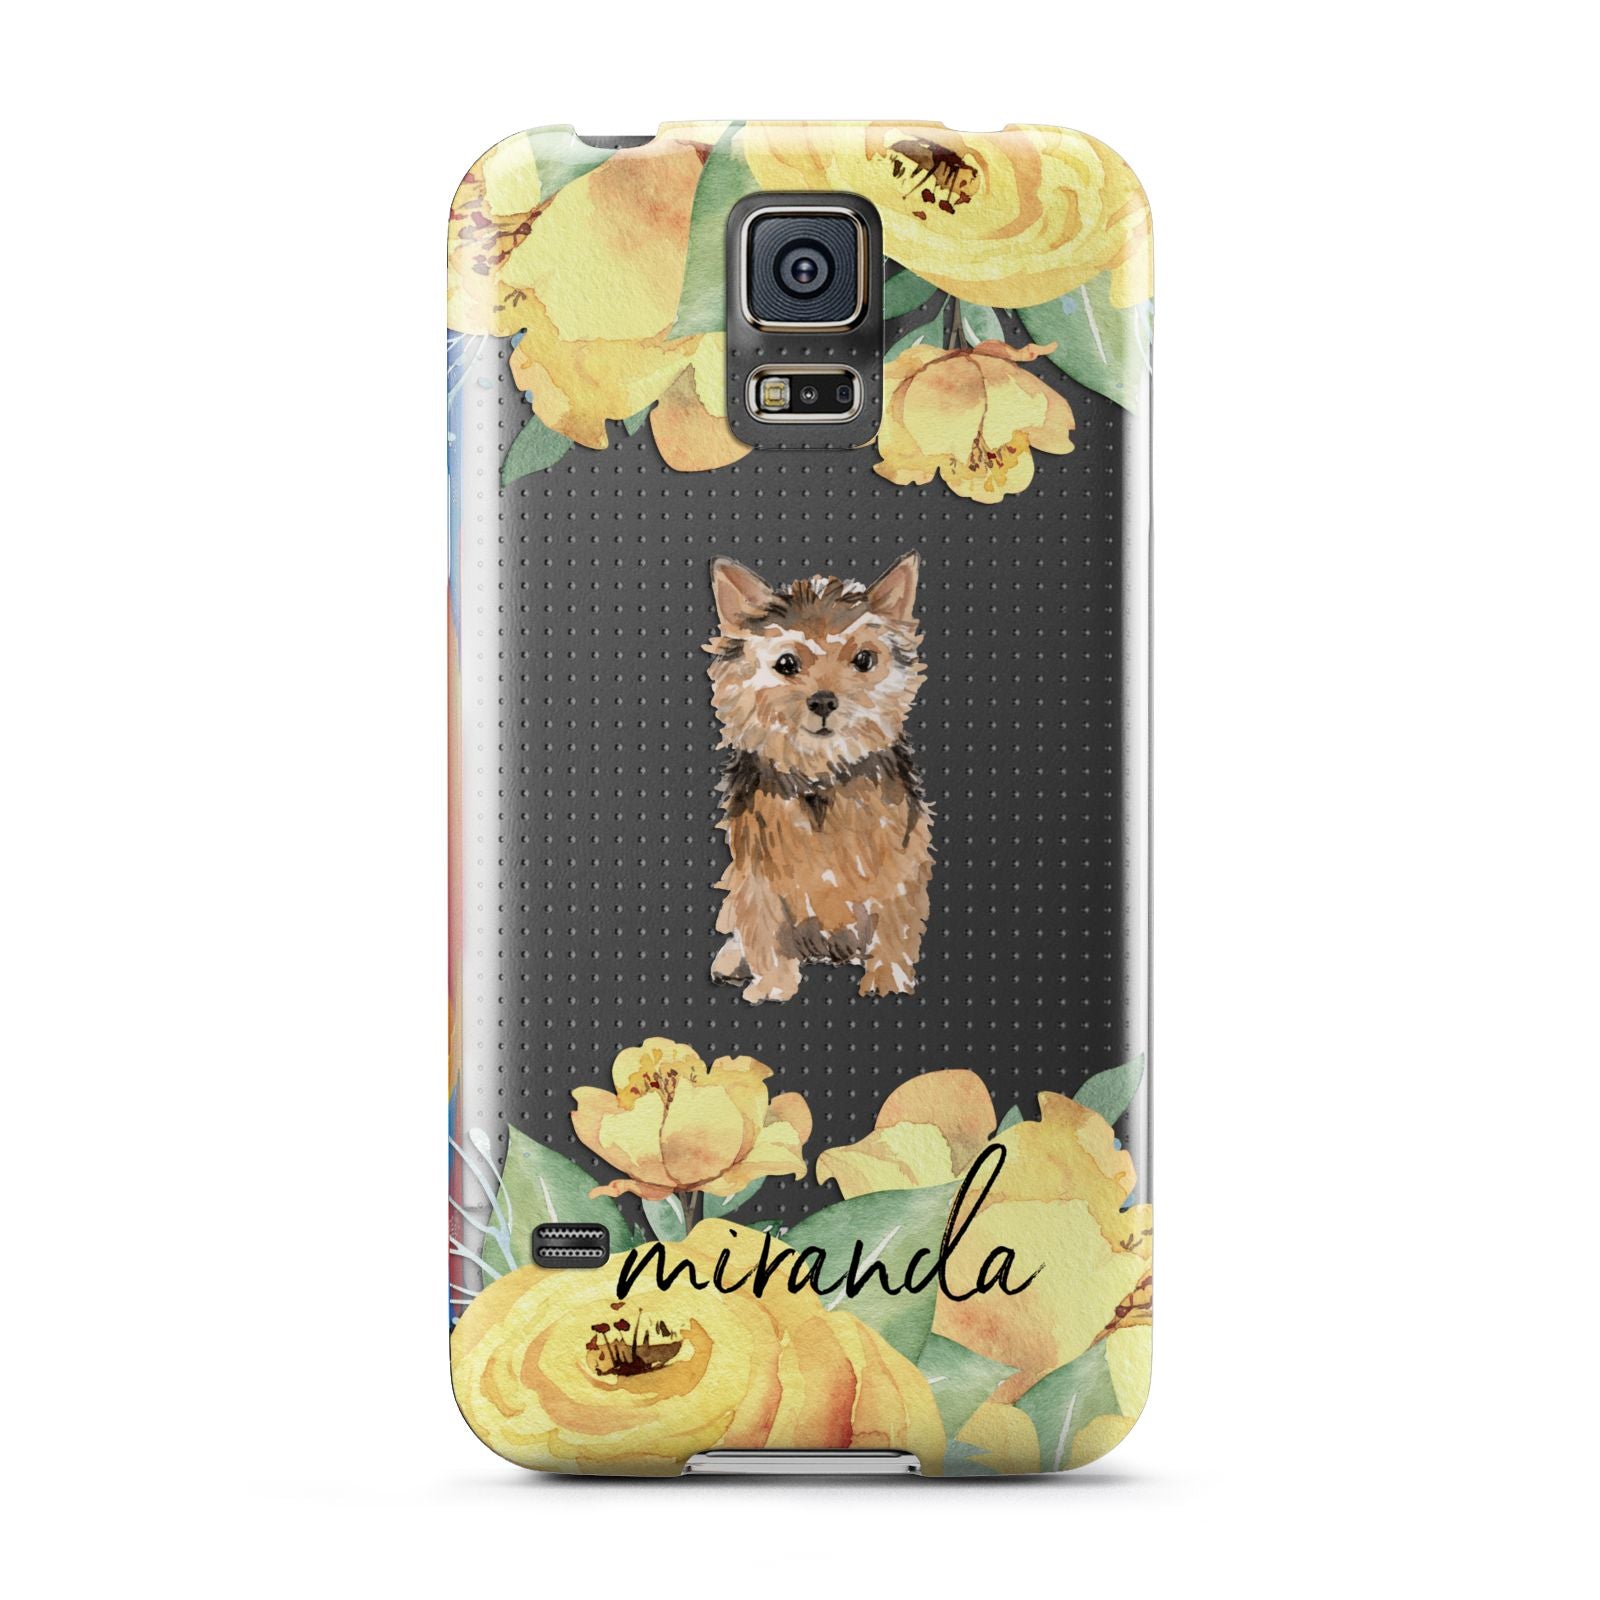 Personalised Norwich Terrier Samsung Galaxy S5 Case